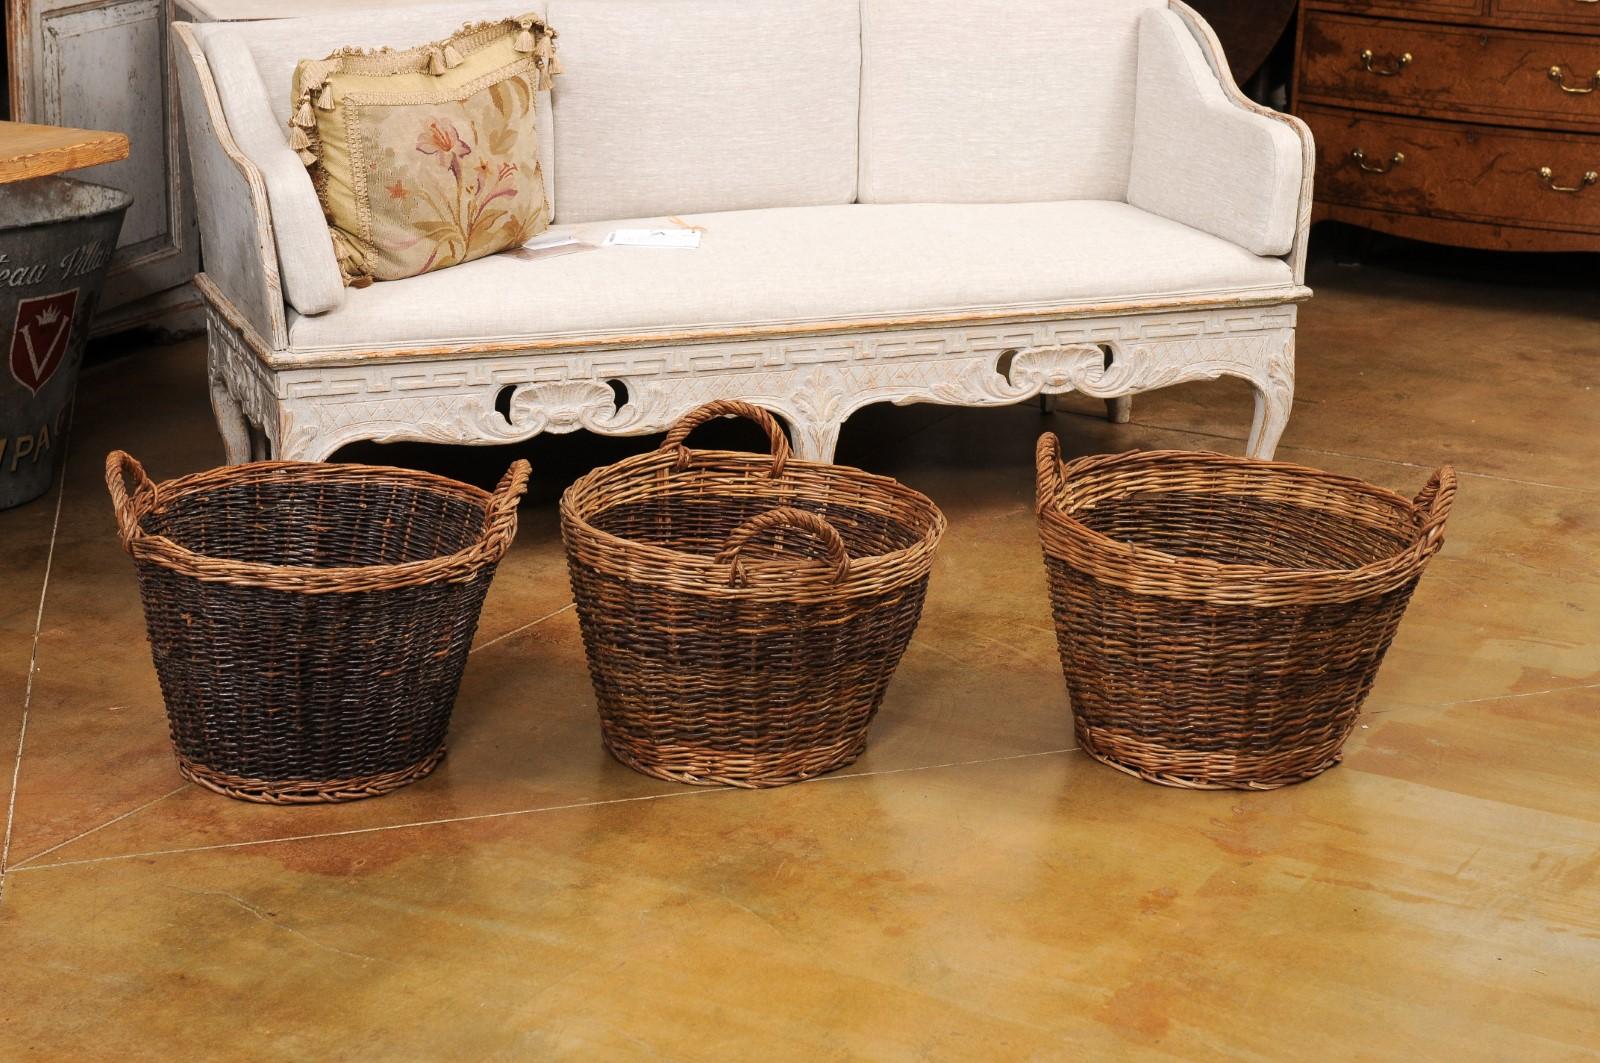 Handmade English Two Toned Wicker Baskets from Devon with Double Handles, Each 5